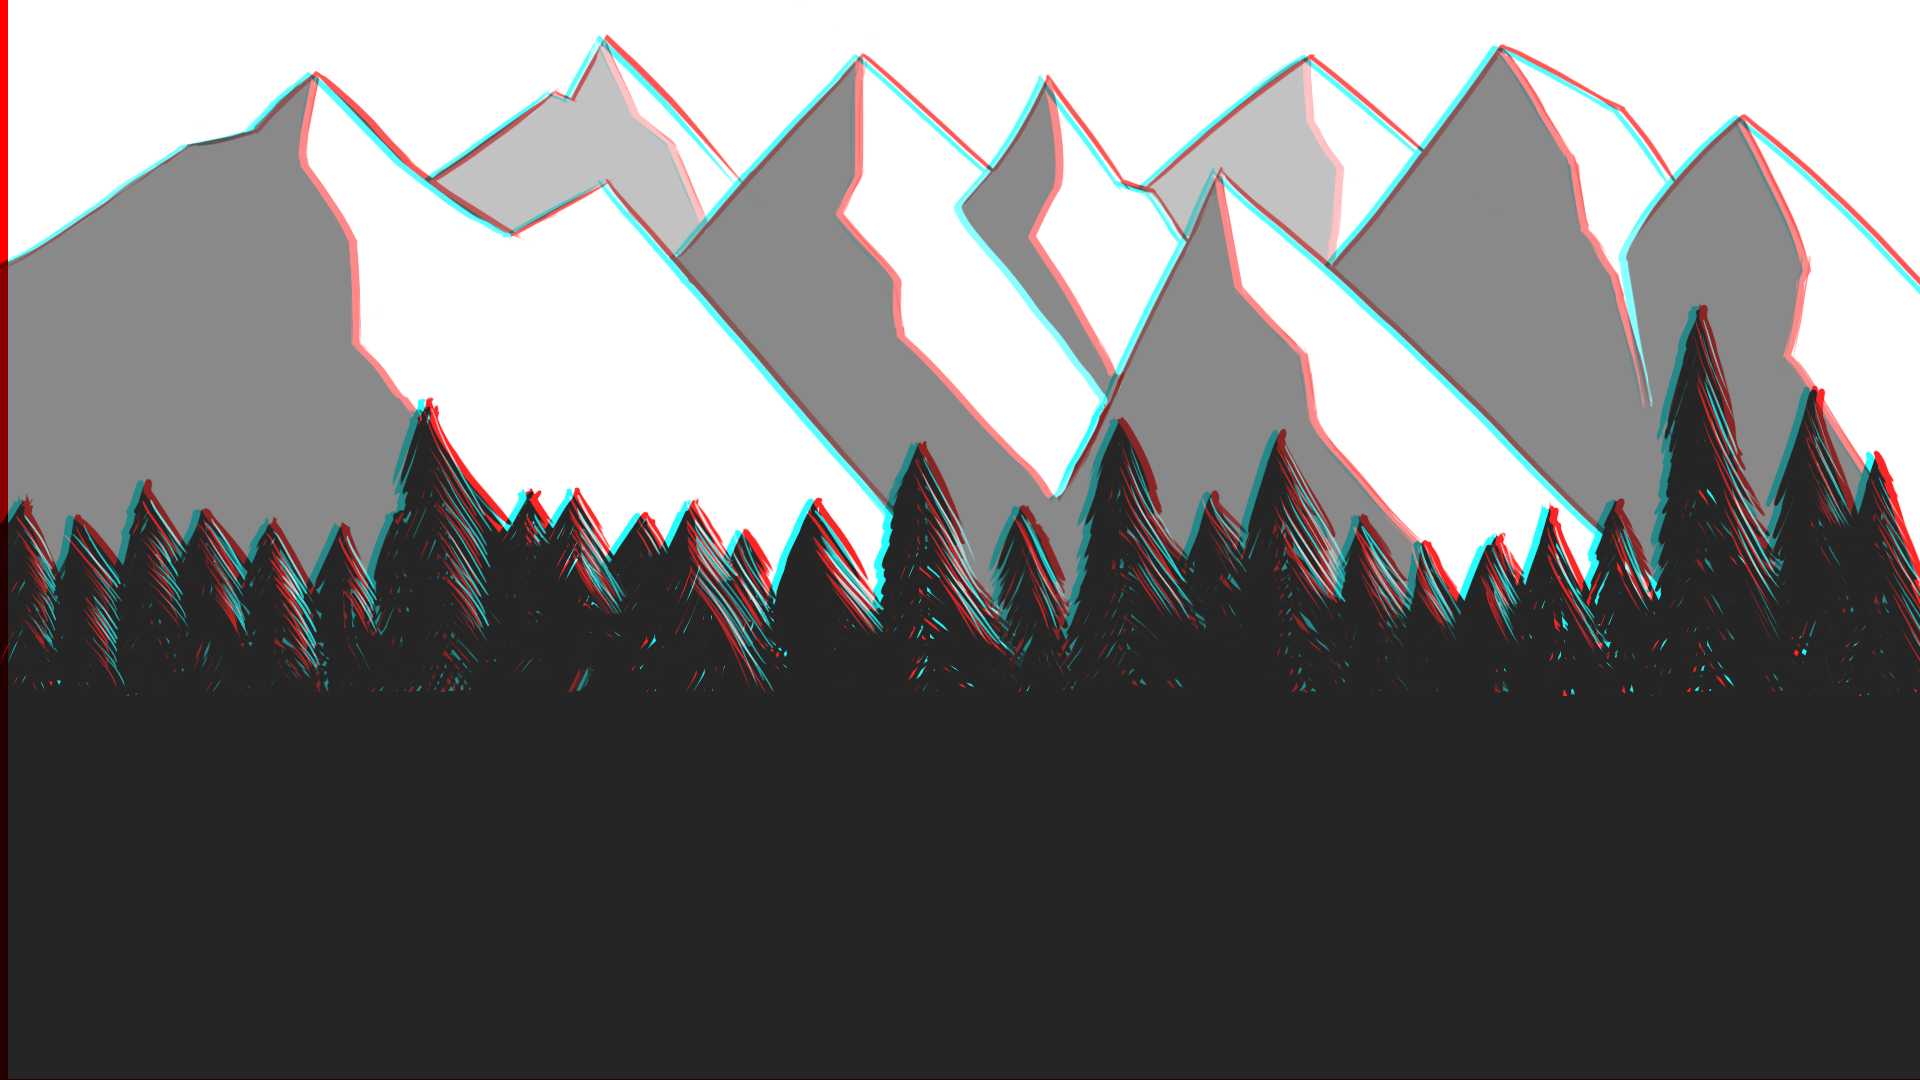 Monochrome Nature Forest Mountain Top Hills Landscape White Grey Snow Digital Drawing Chromatic Aber 1920x1080